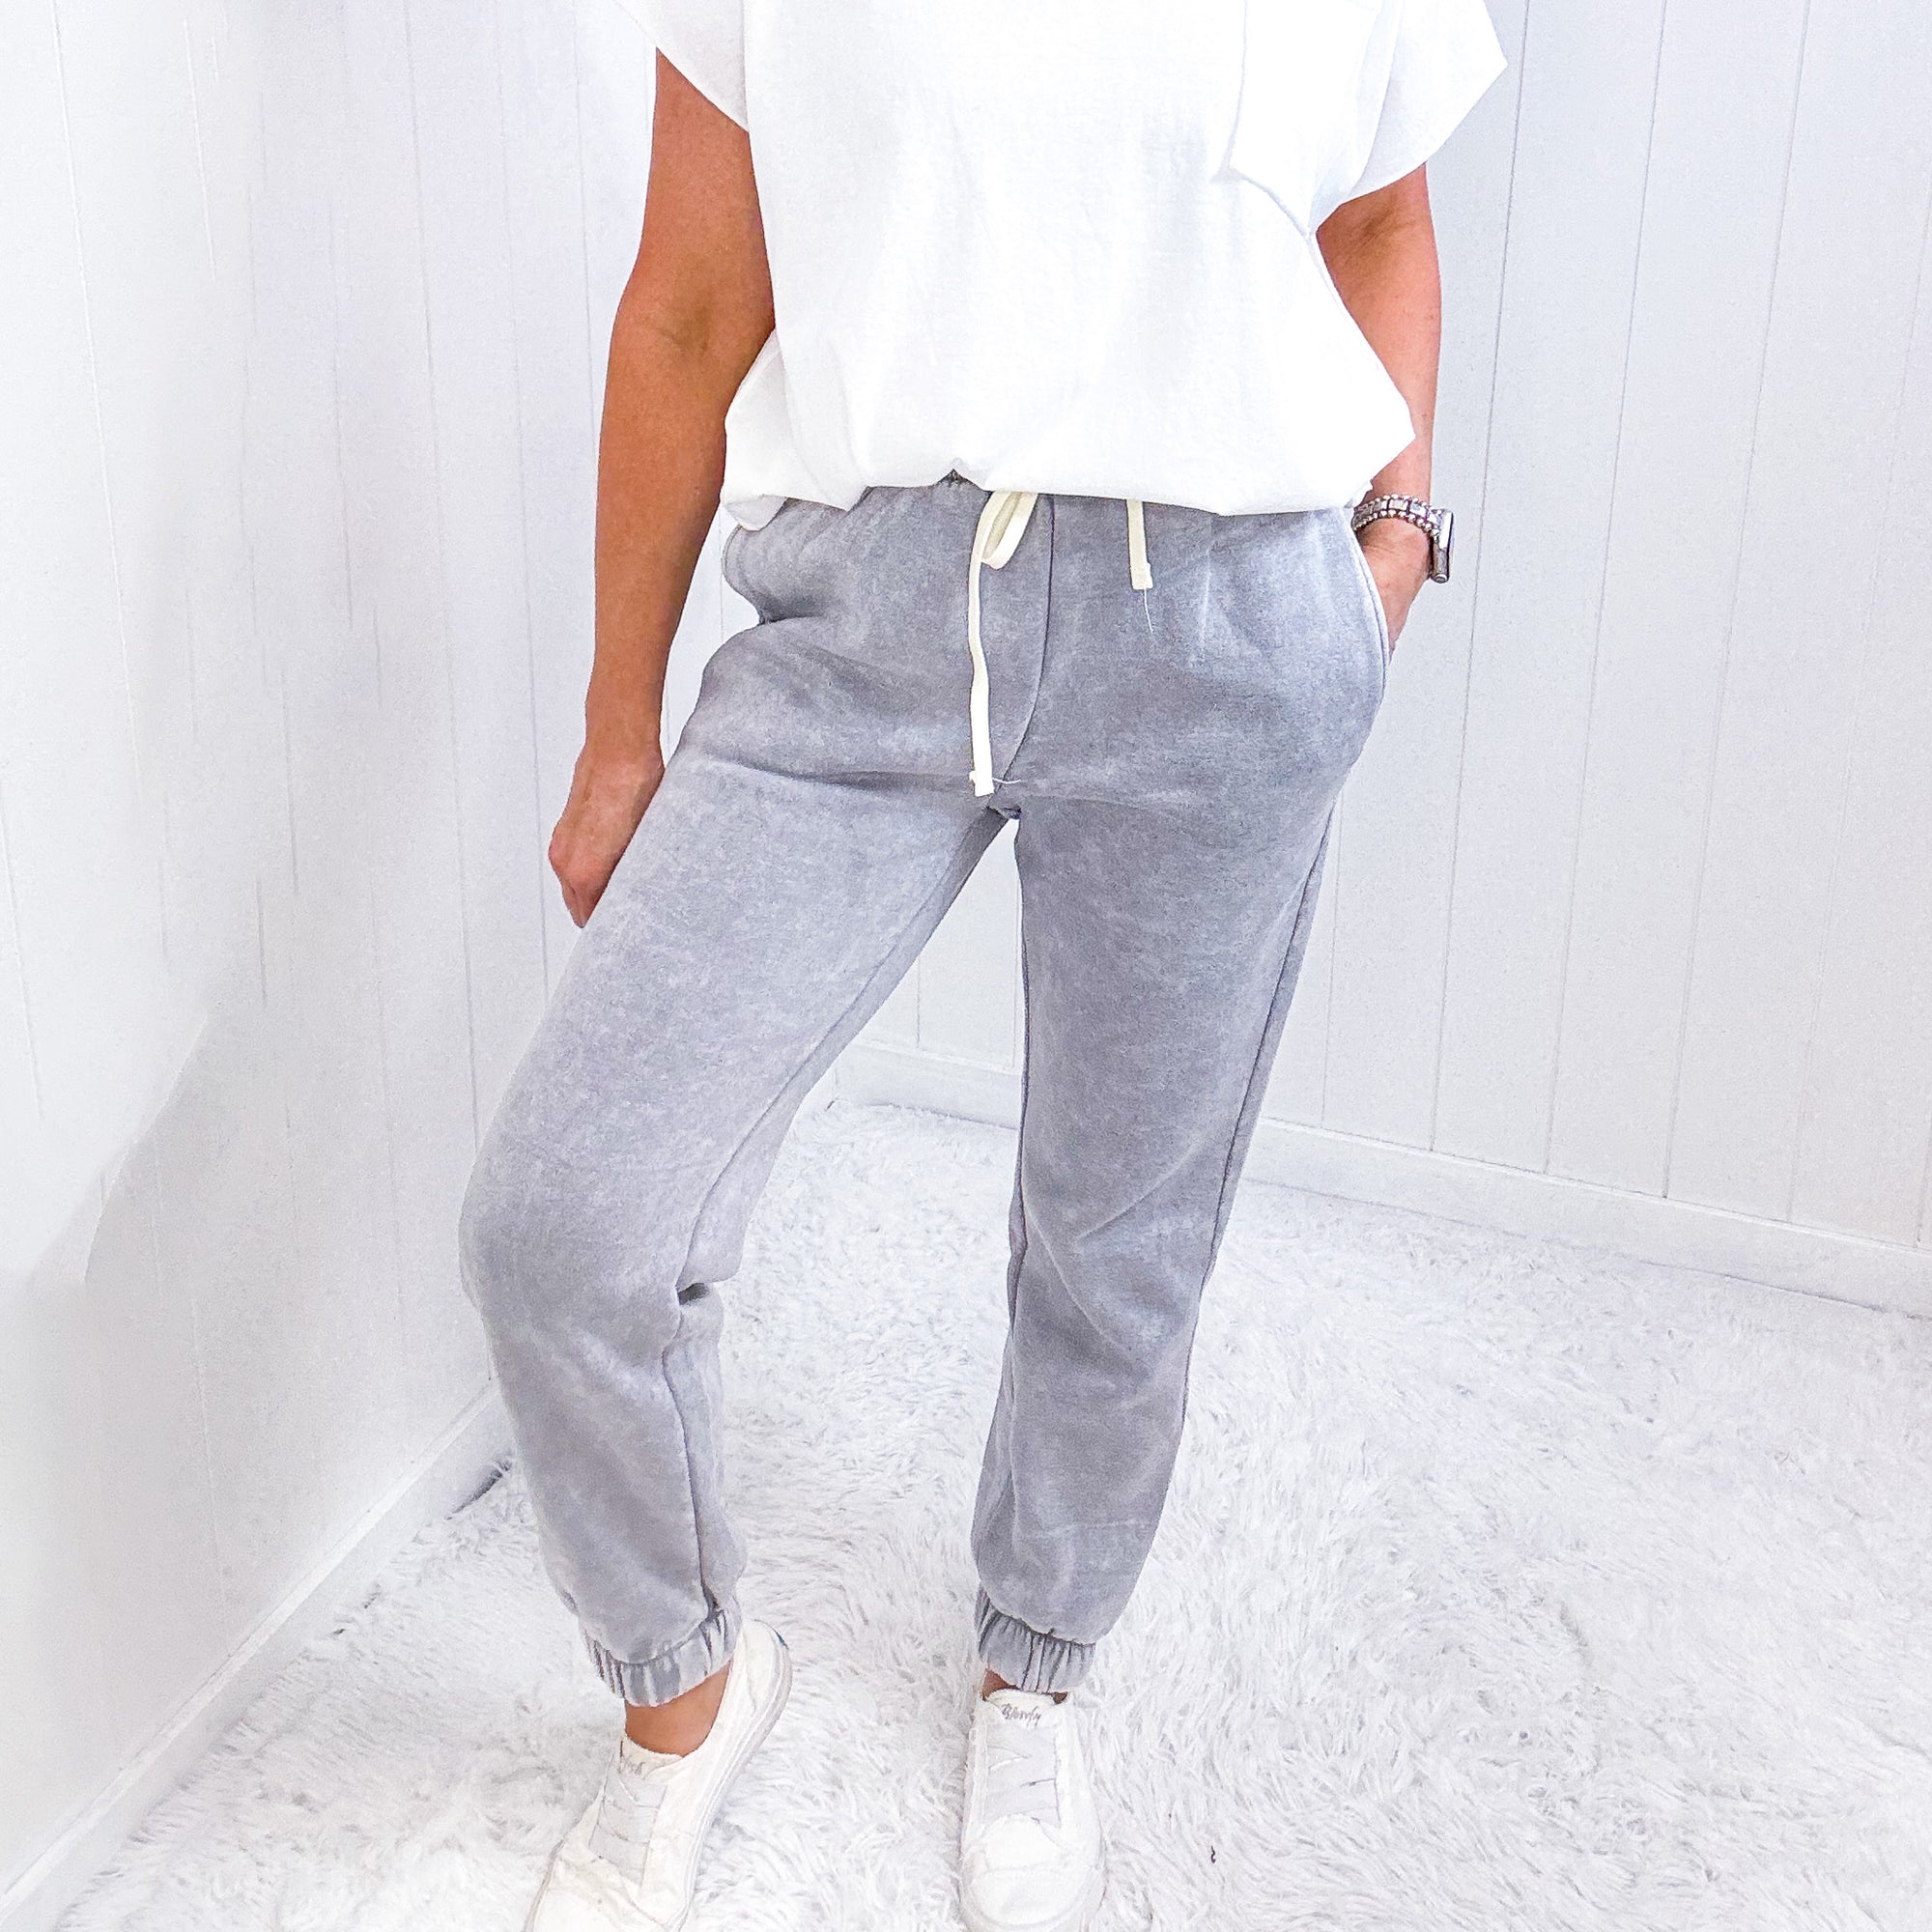 Chill Vibes Washed Fleece Joggers in 4 colors - Boujee Boutique 